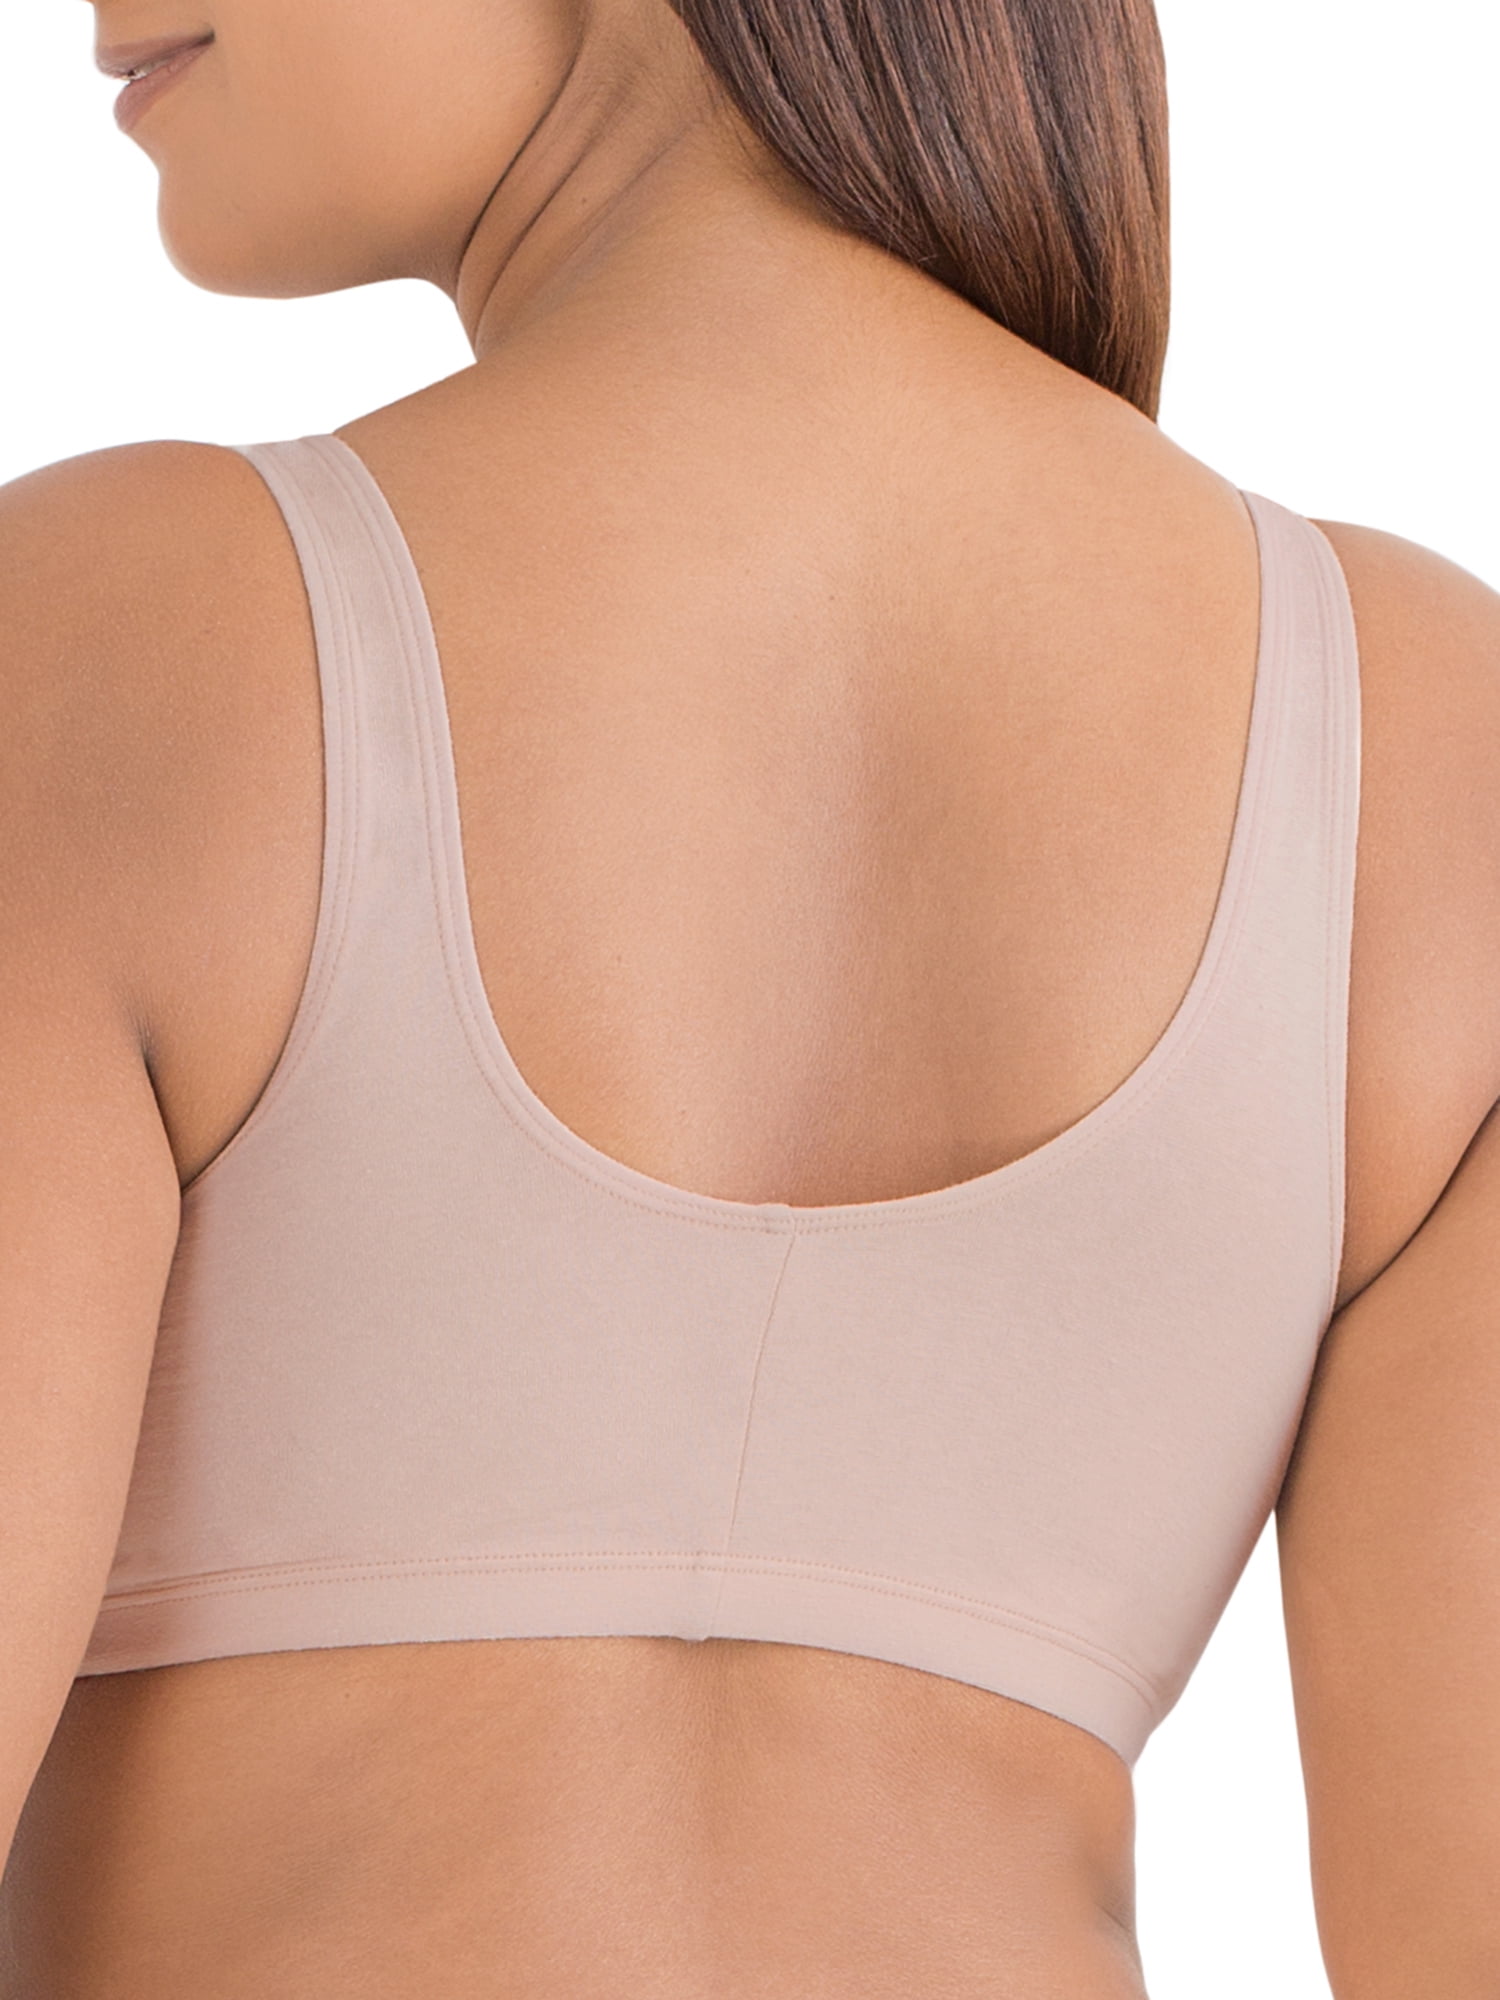 Fruit of the Loom Women's Comfort Front-Close Sports Bra Size 40, 46 